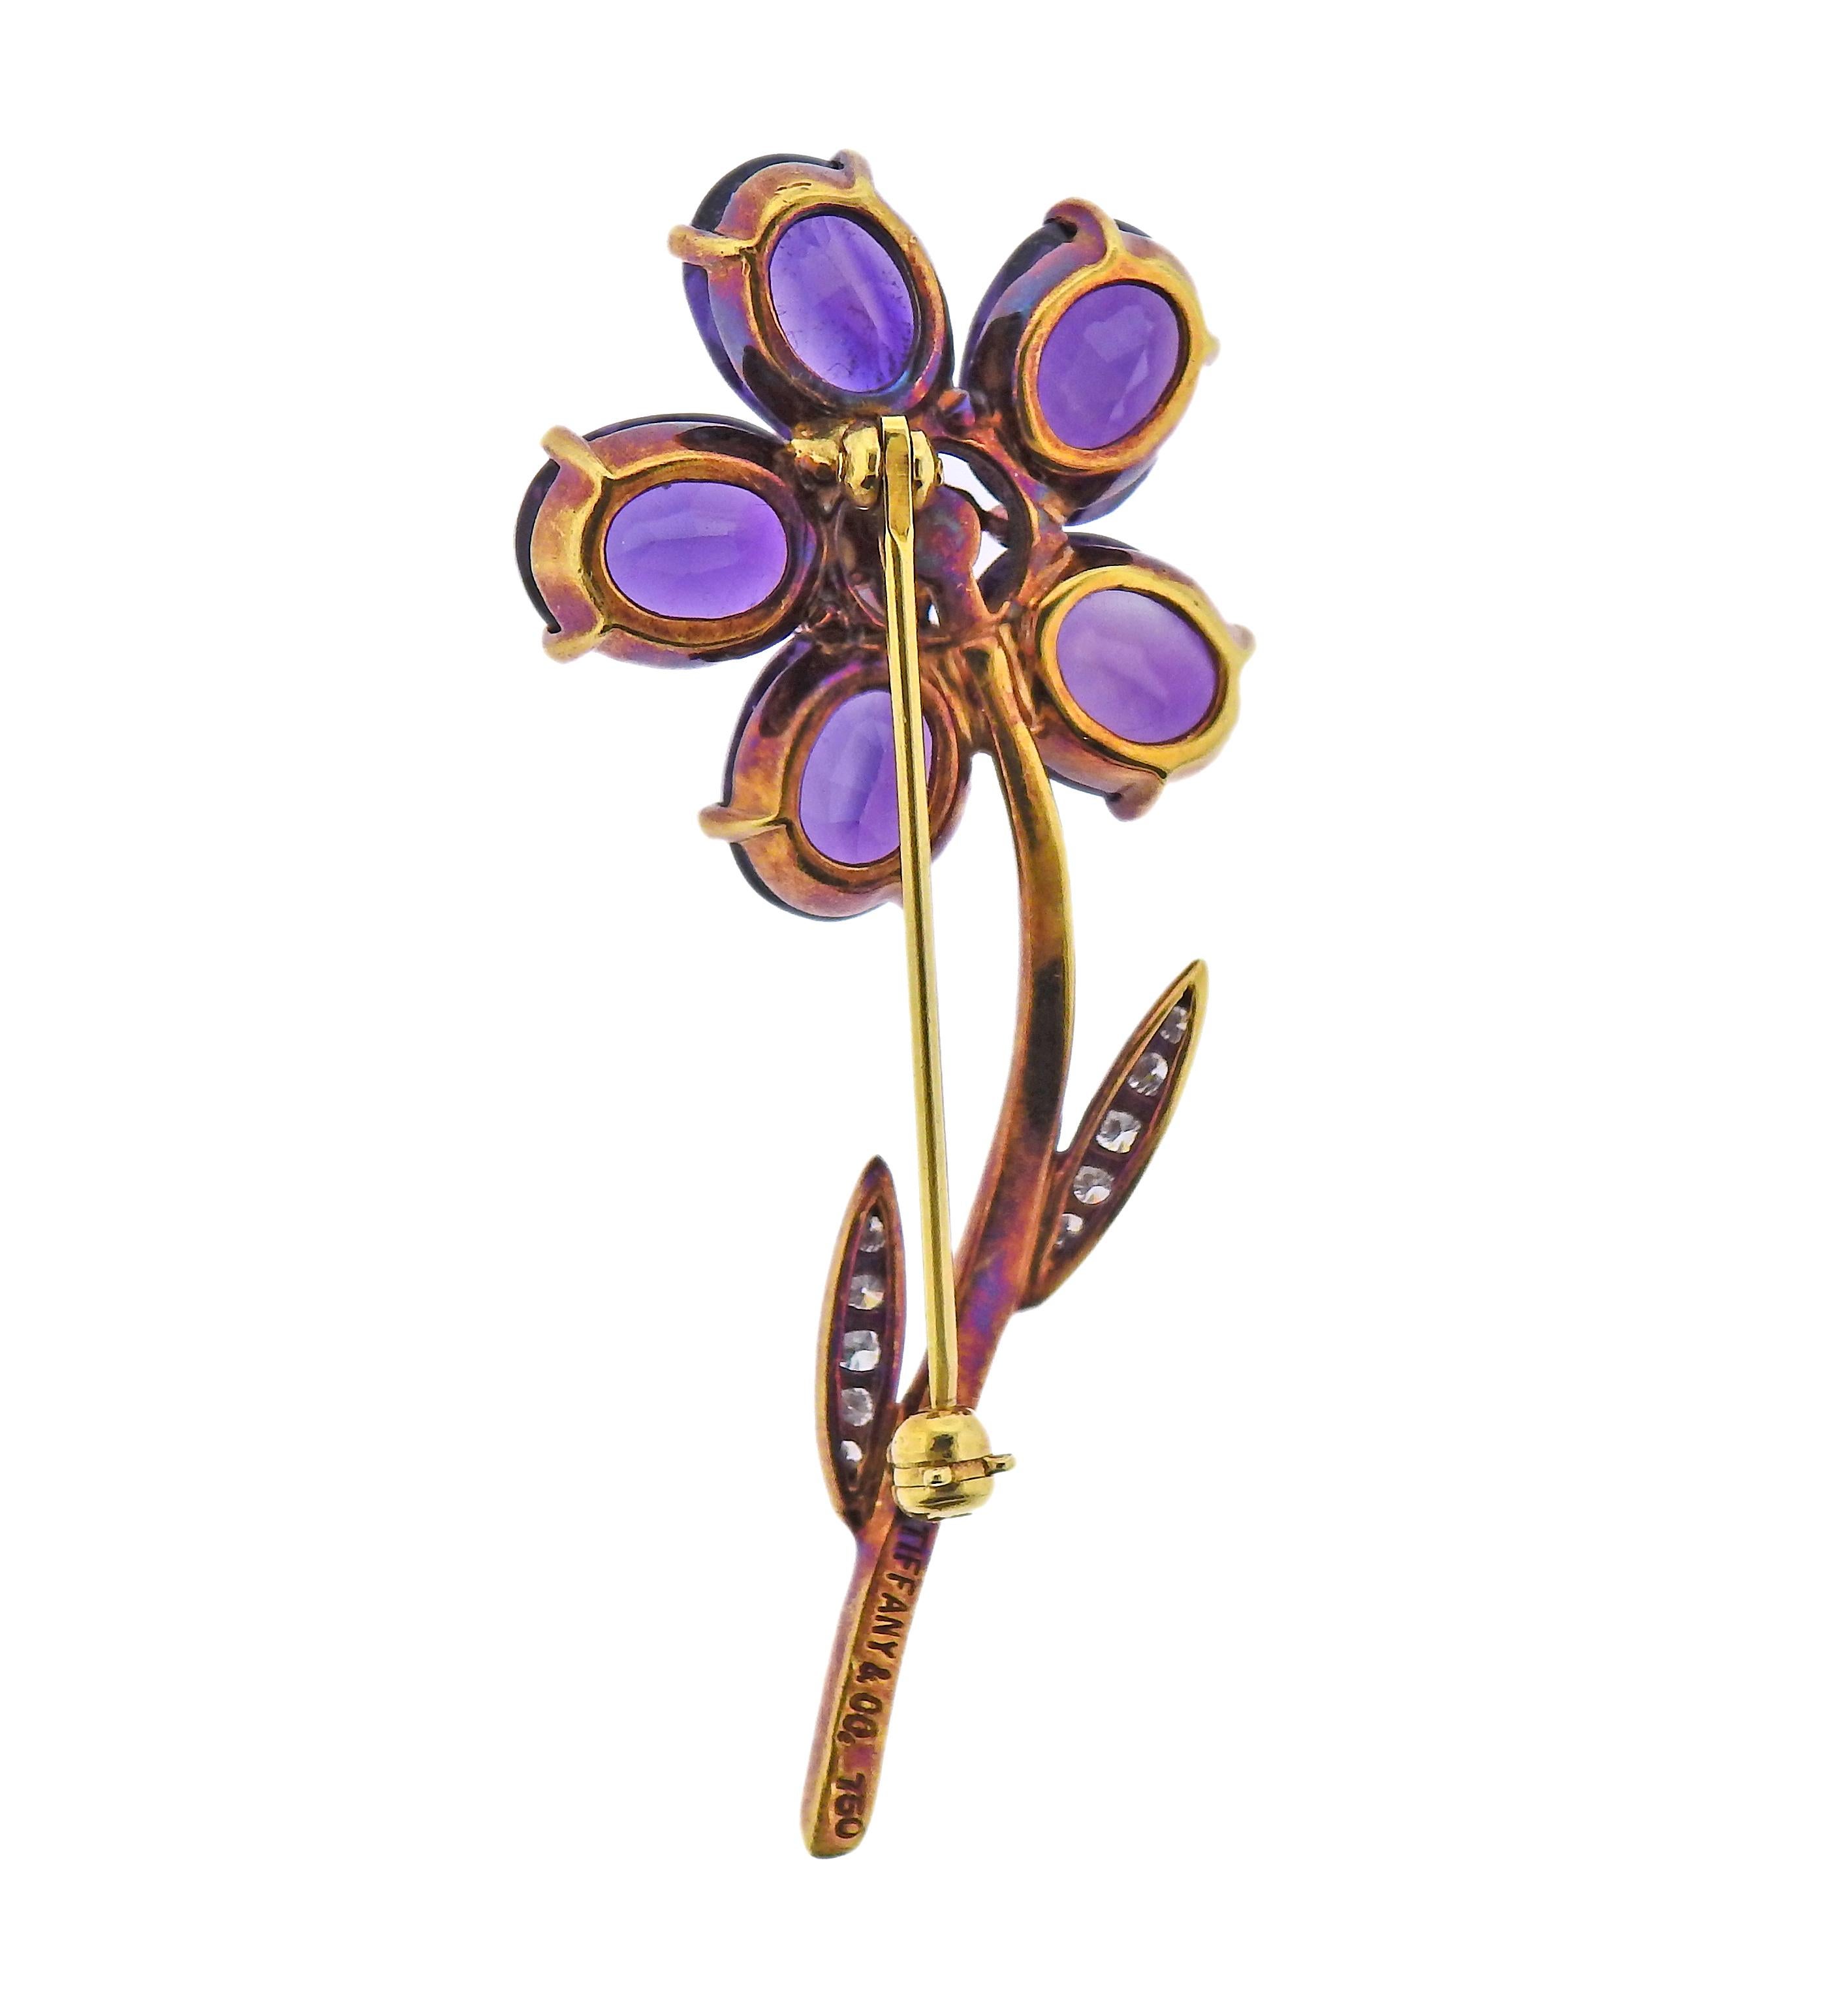 18k gold flower brooch by Tiffany & Co, with amethyst petals and approx. 0.55cts in diamonds. Brooch is 47mm x 24mm. Marked: Tiffany & Co, 750. Weight - 8.4 grams.